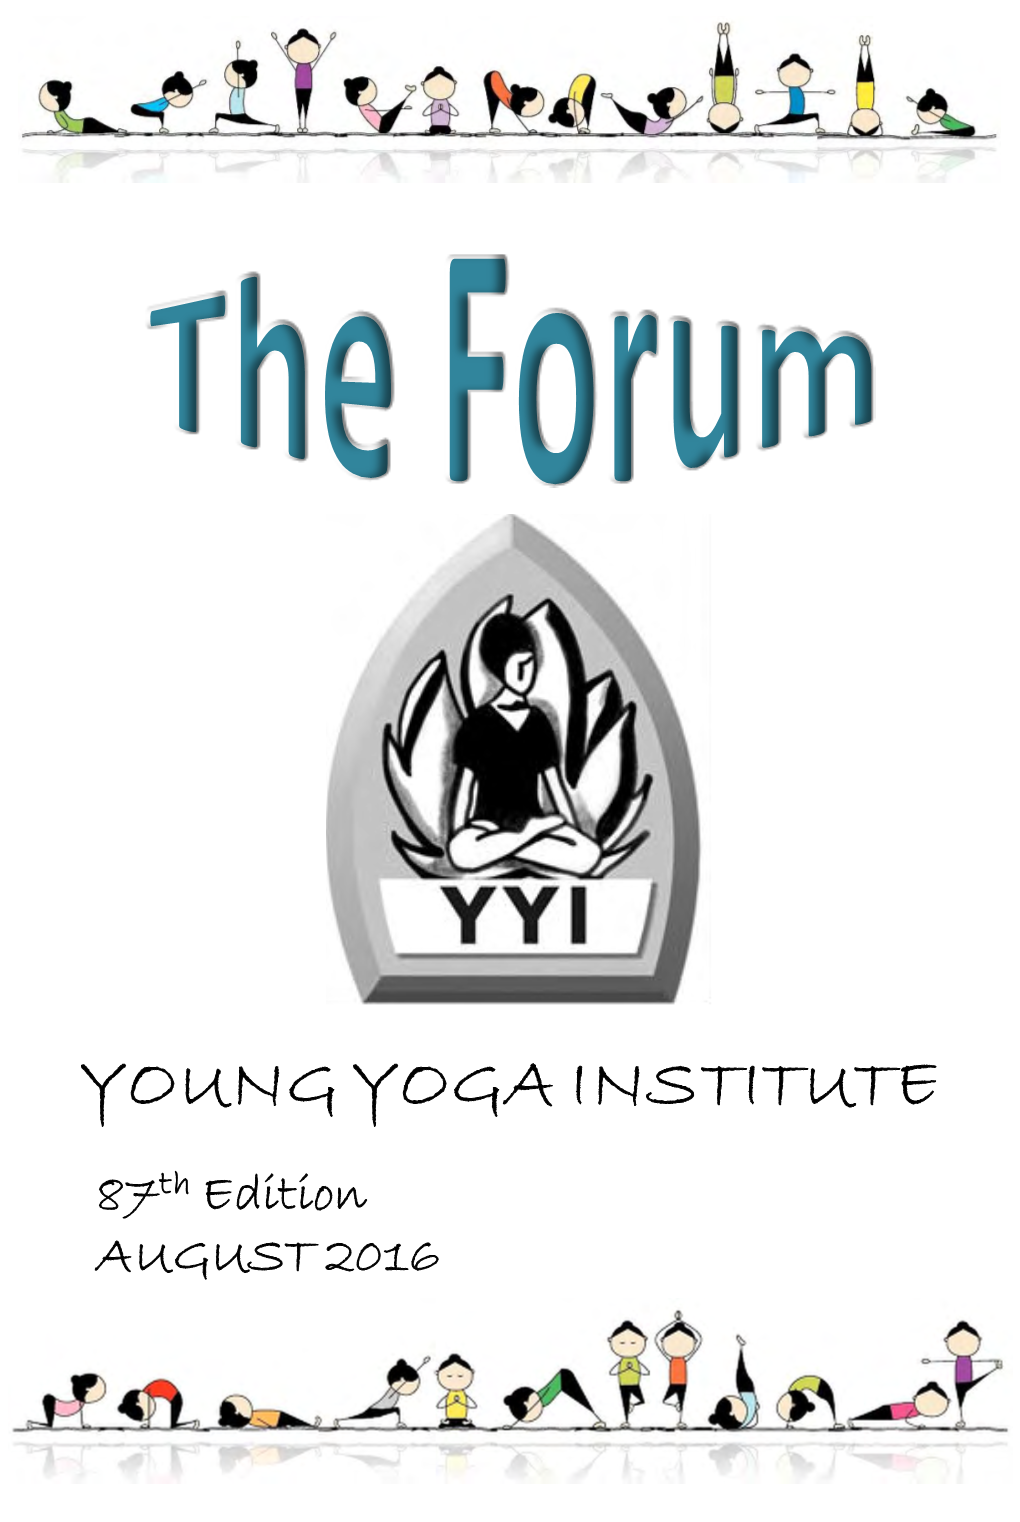 The-Forum-87Th-Edition-September